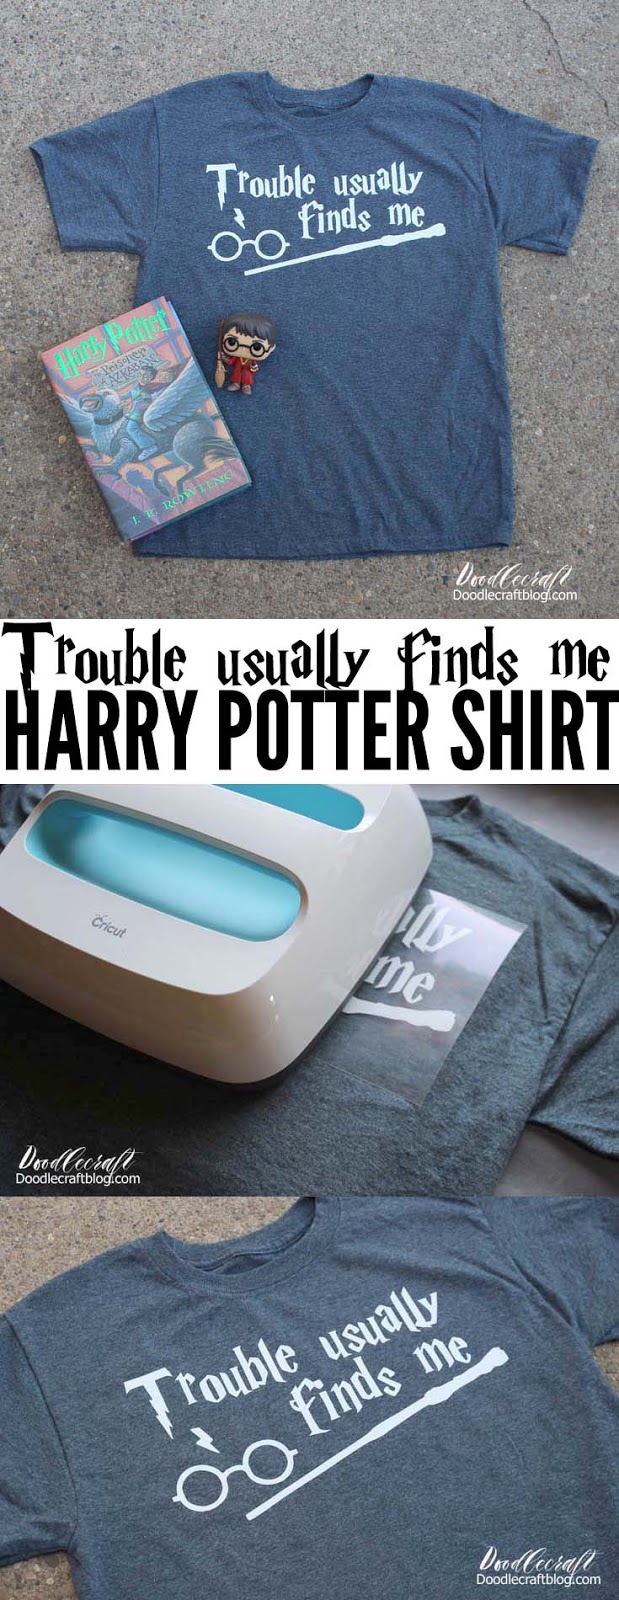 Make a cool Harry Potter shirt in minutes with iron-on vinyl and Cricut